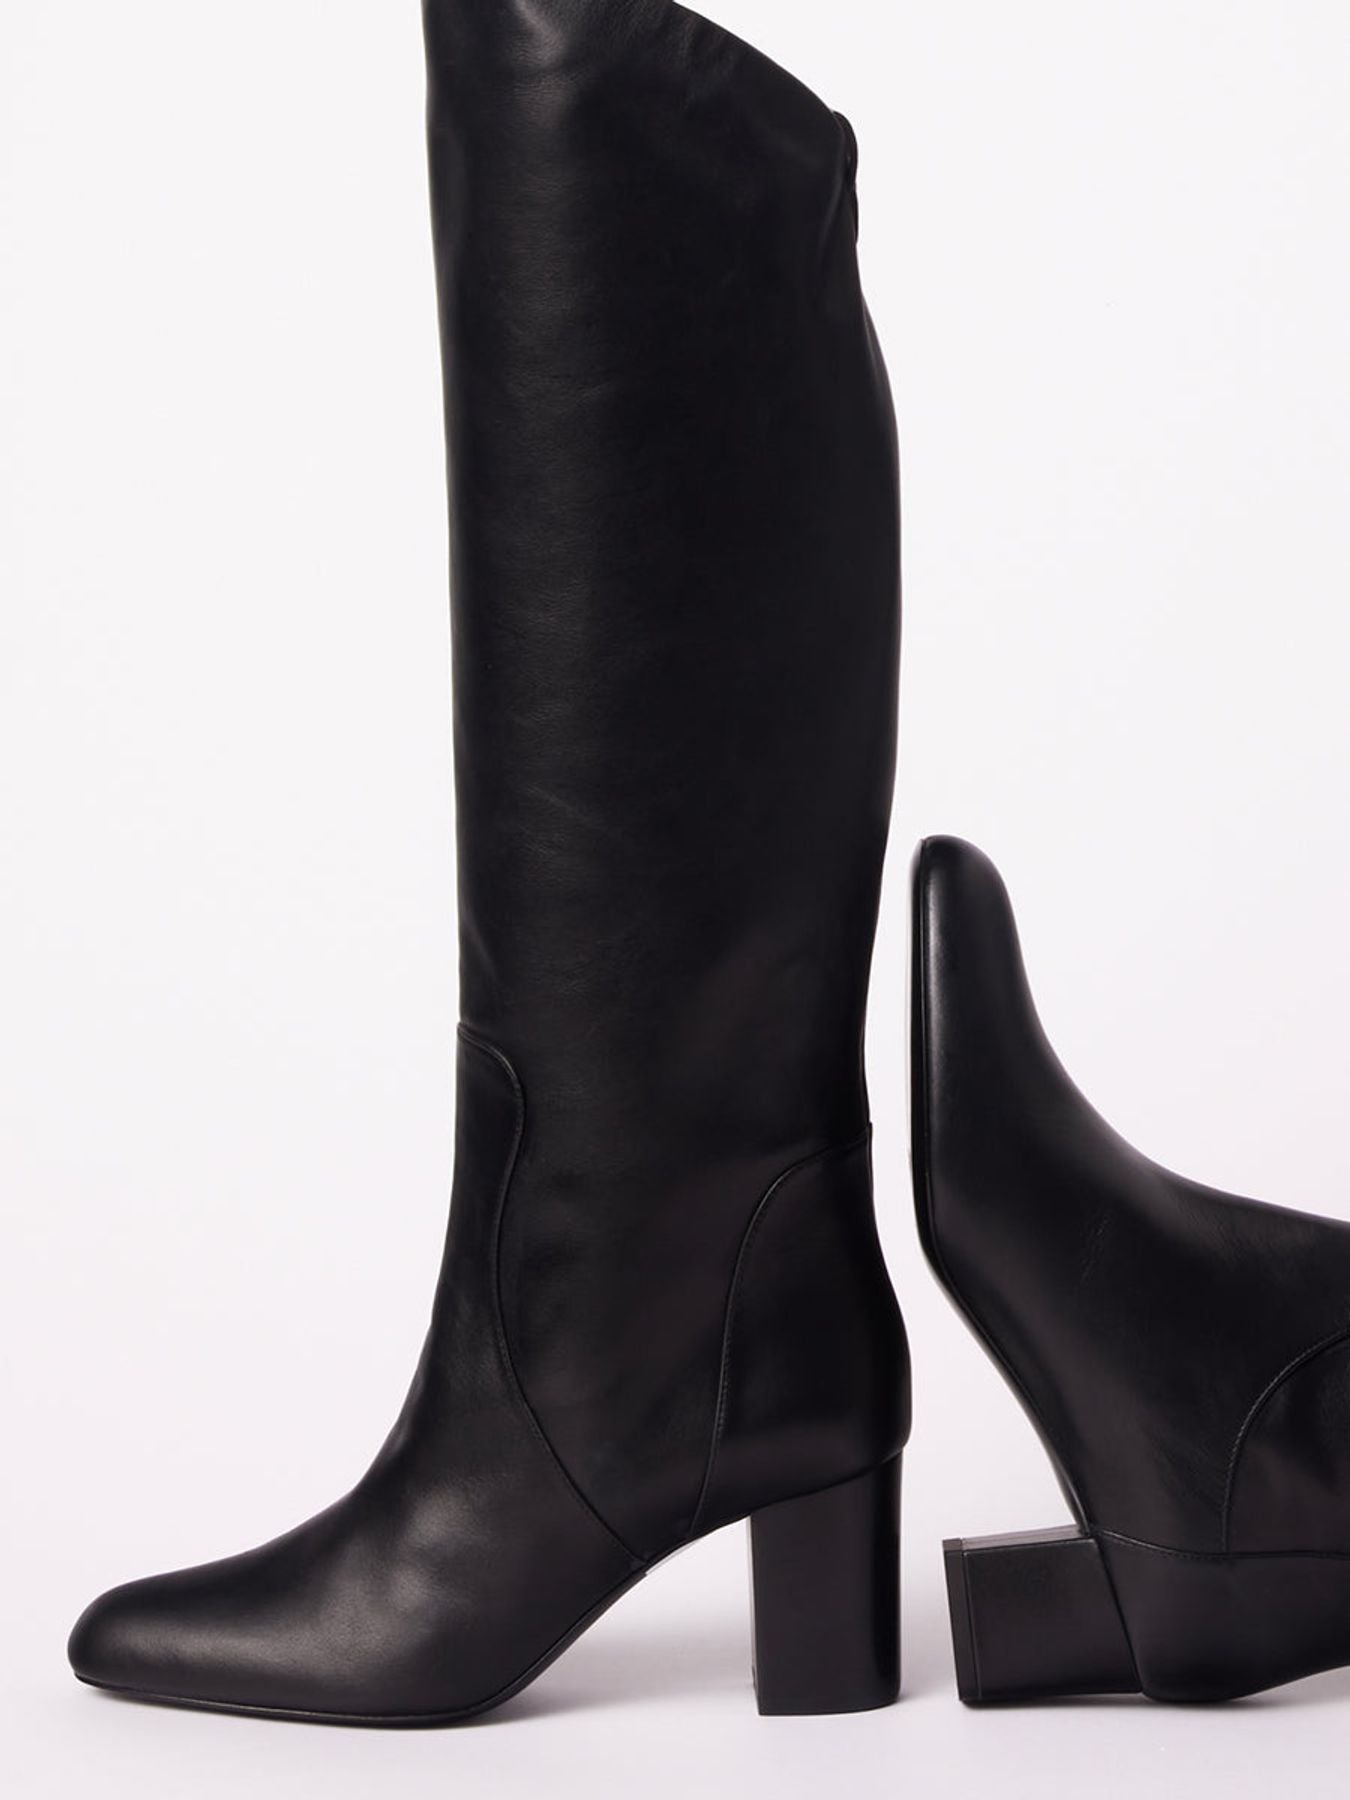 boots-a-heels-black-leather